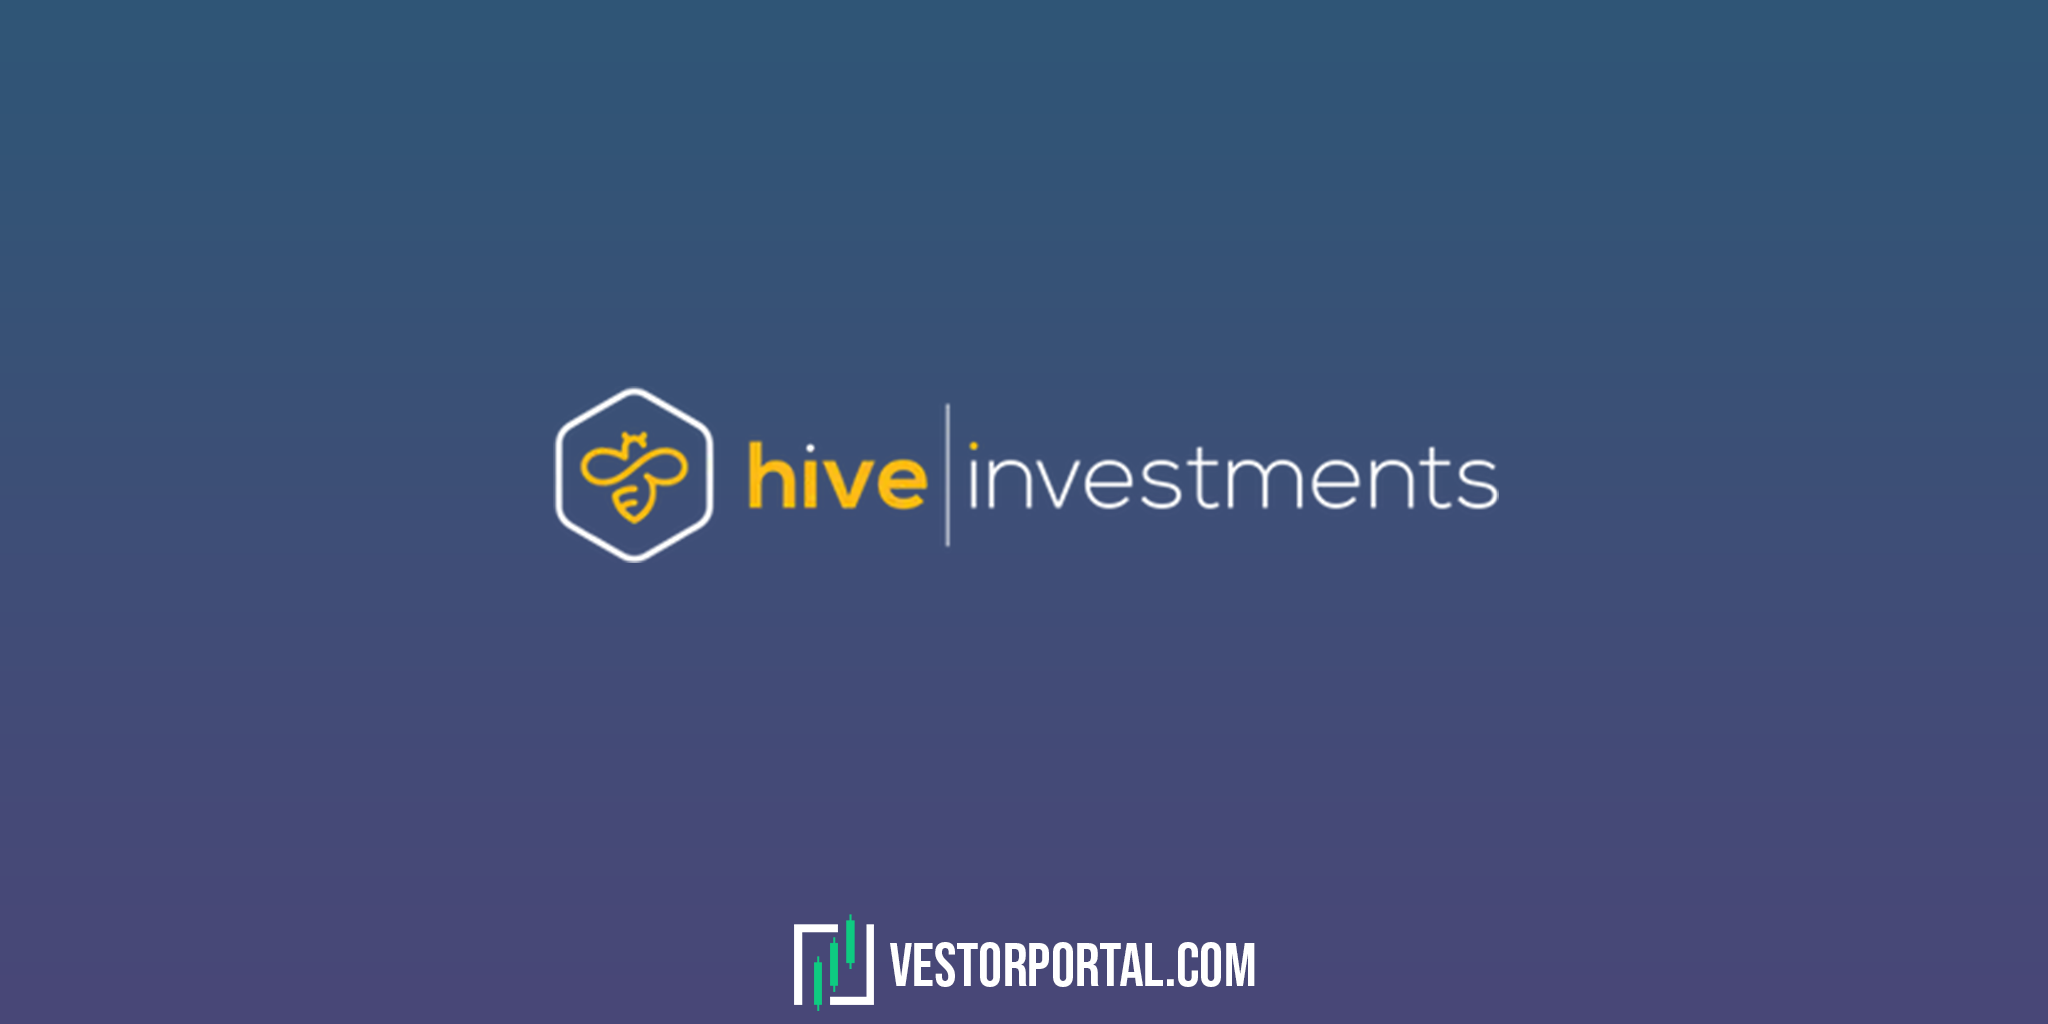 hive.investments